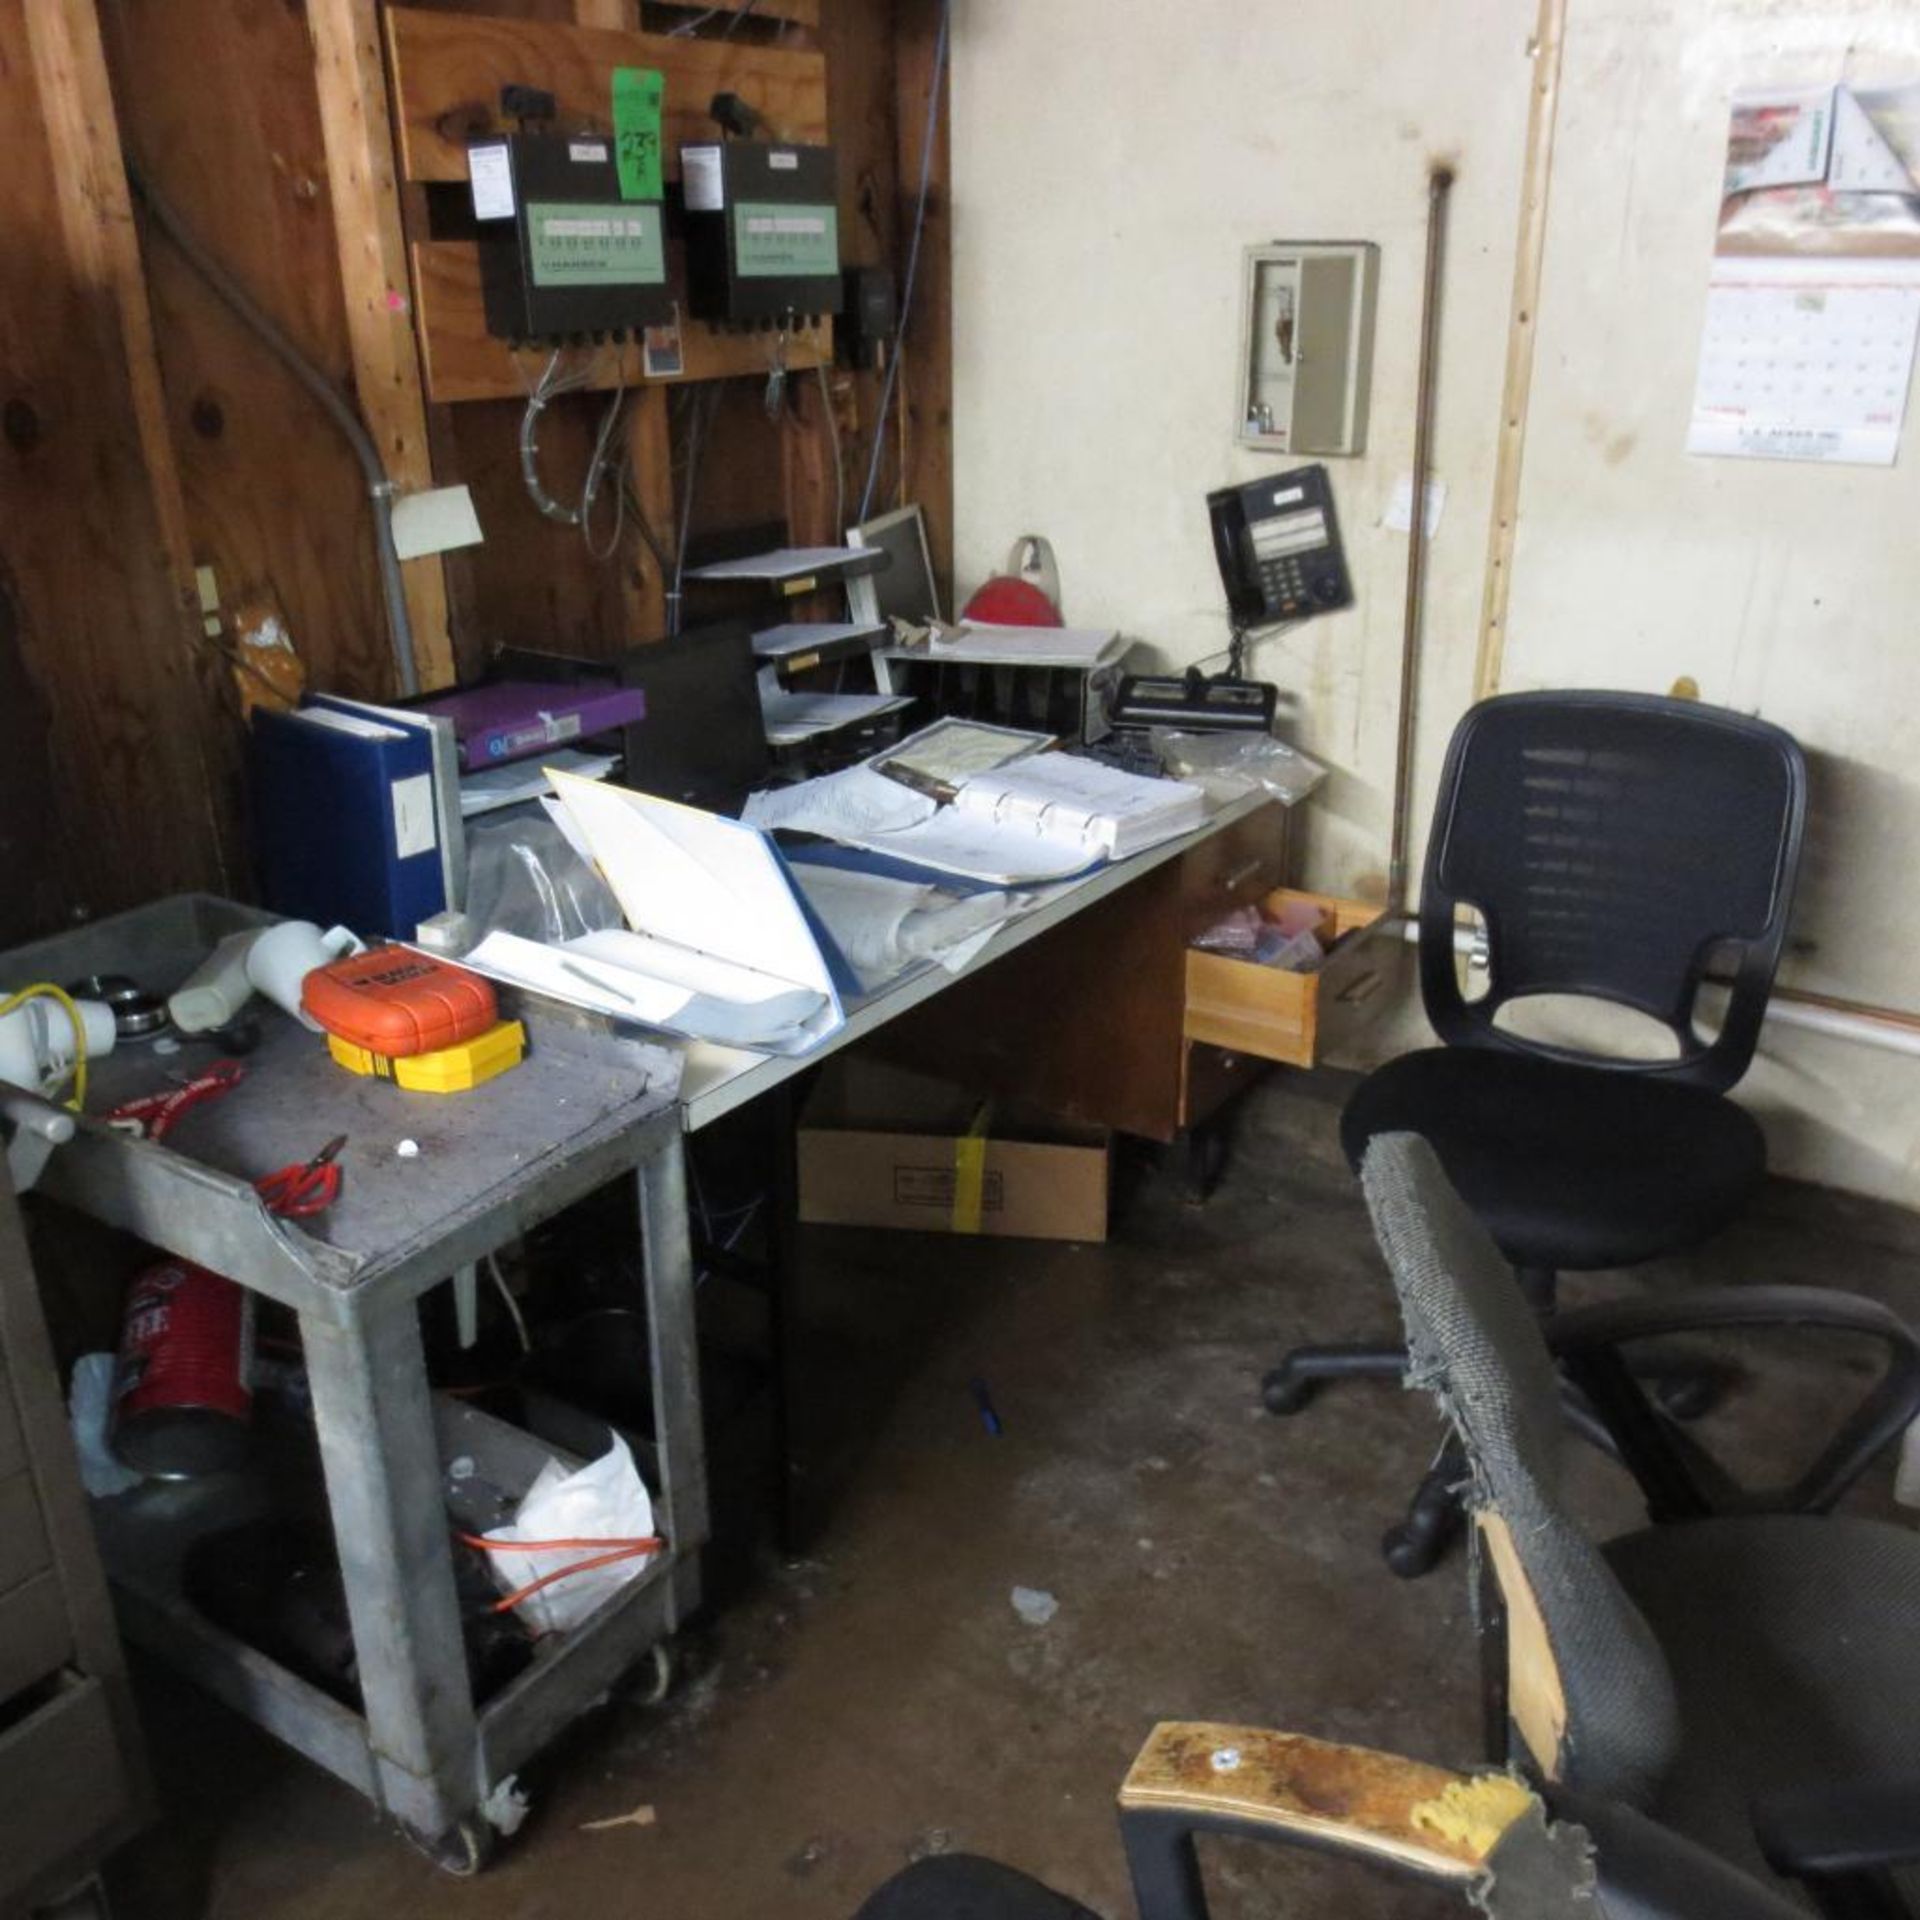 Desks, Chairs, File Cabinet, Cart and Computers ( No File or Computers )